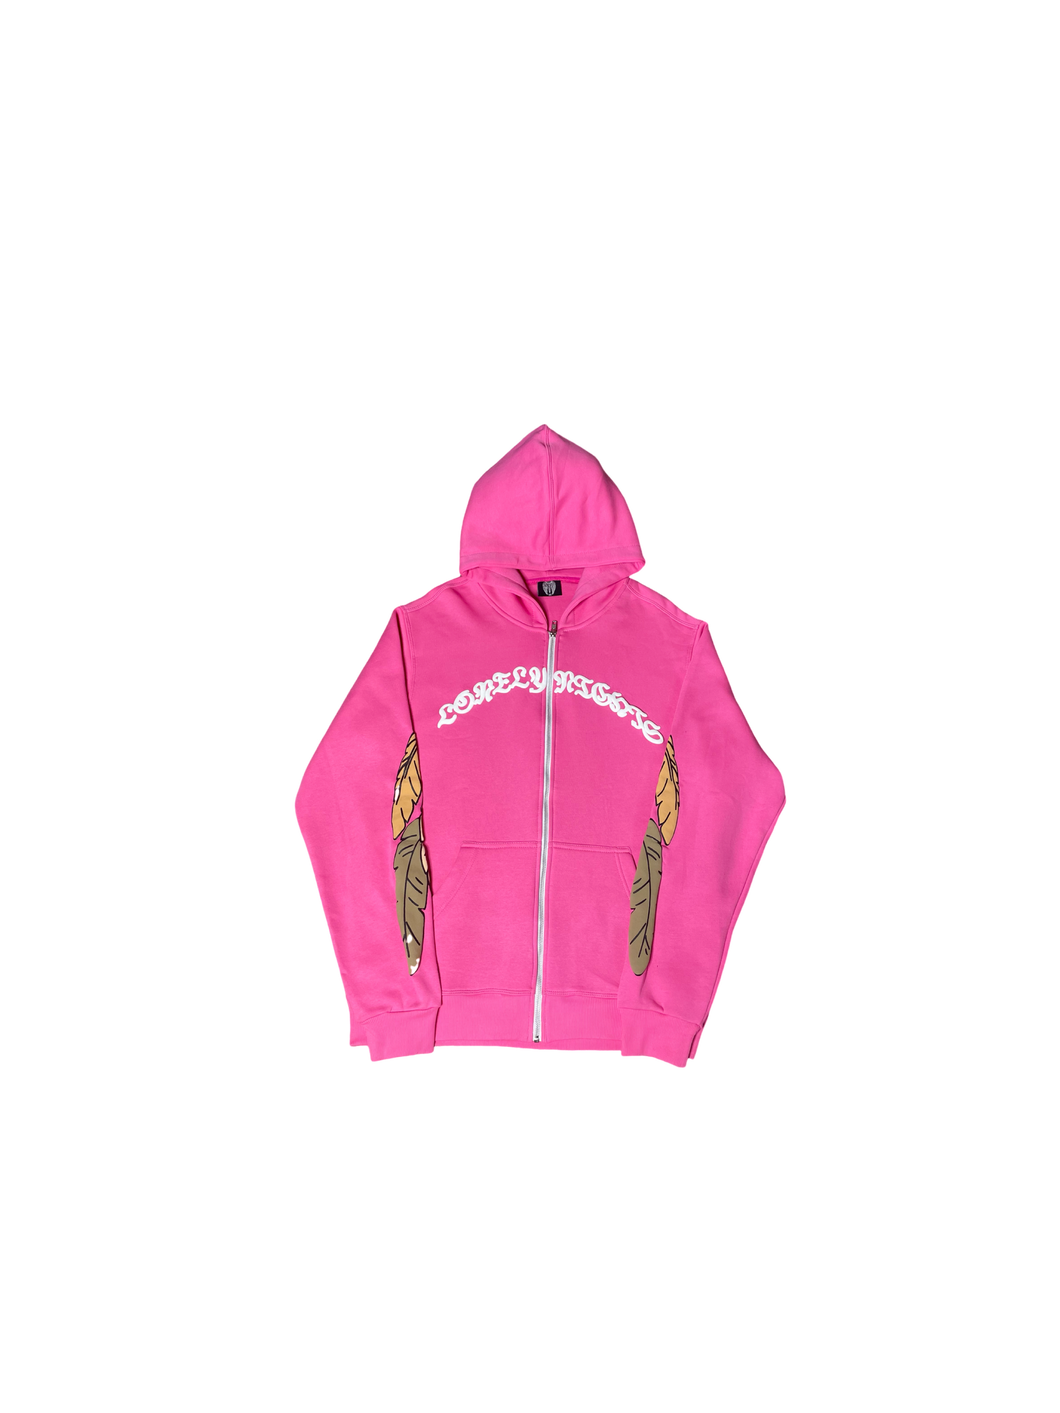 LonelyNights Pink&White hoodie